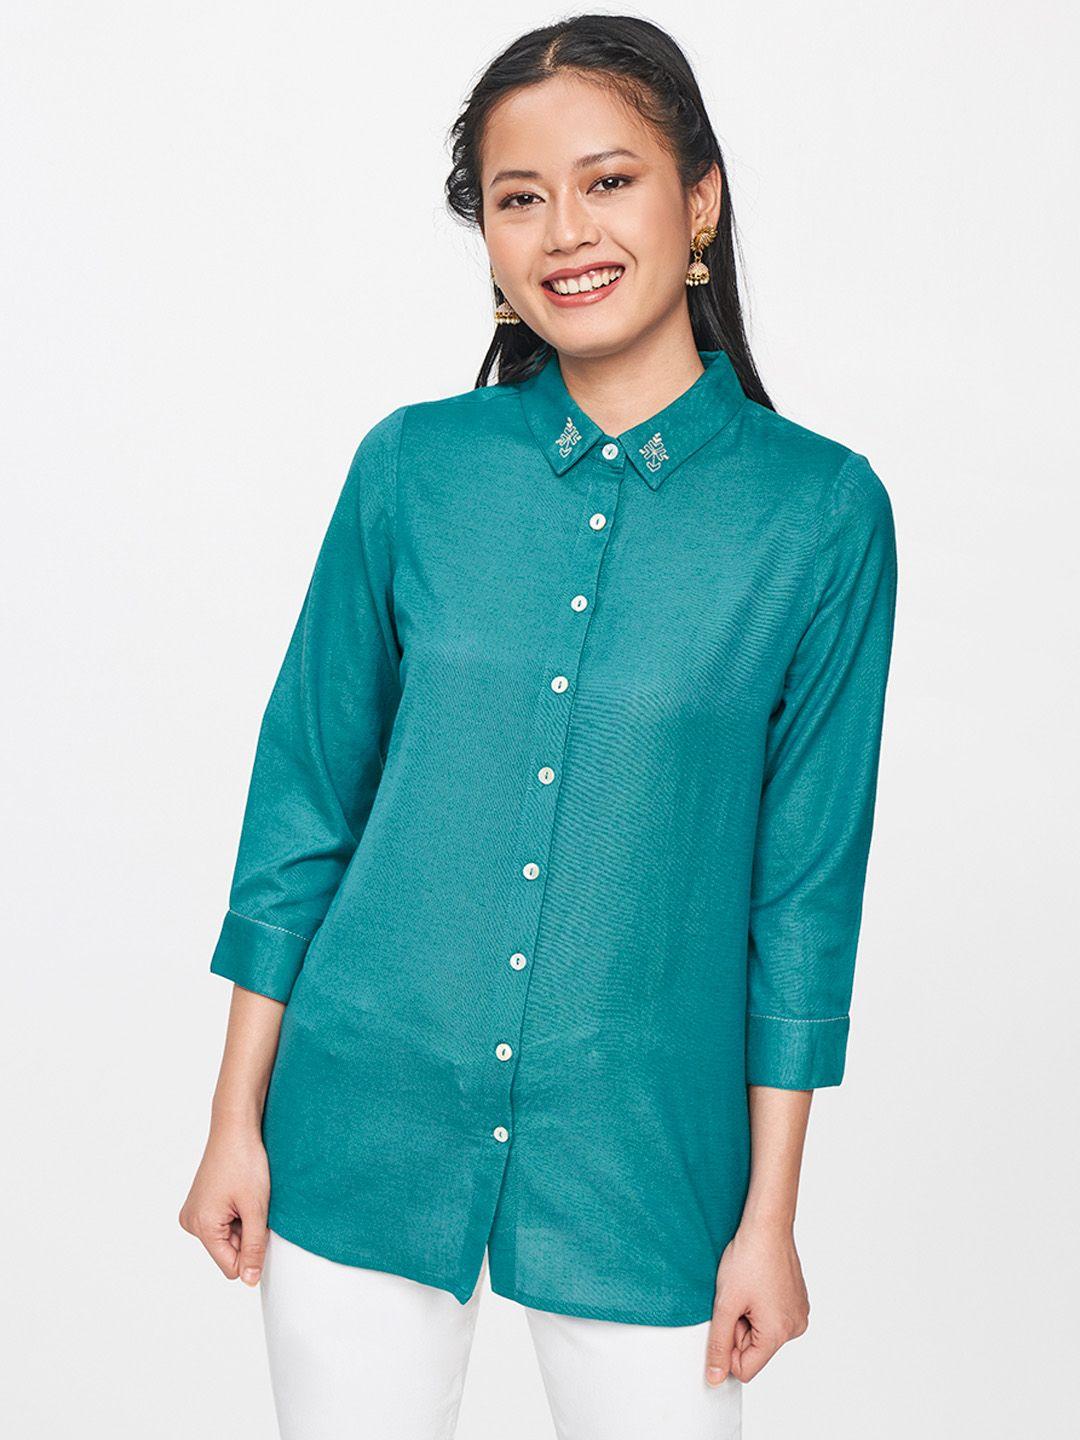 global desi turquoise blue shirt style top with embroidered detail